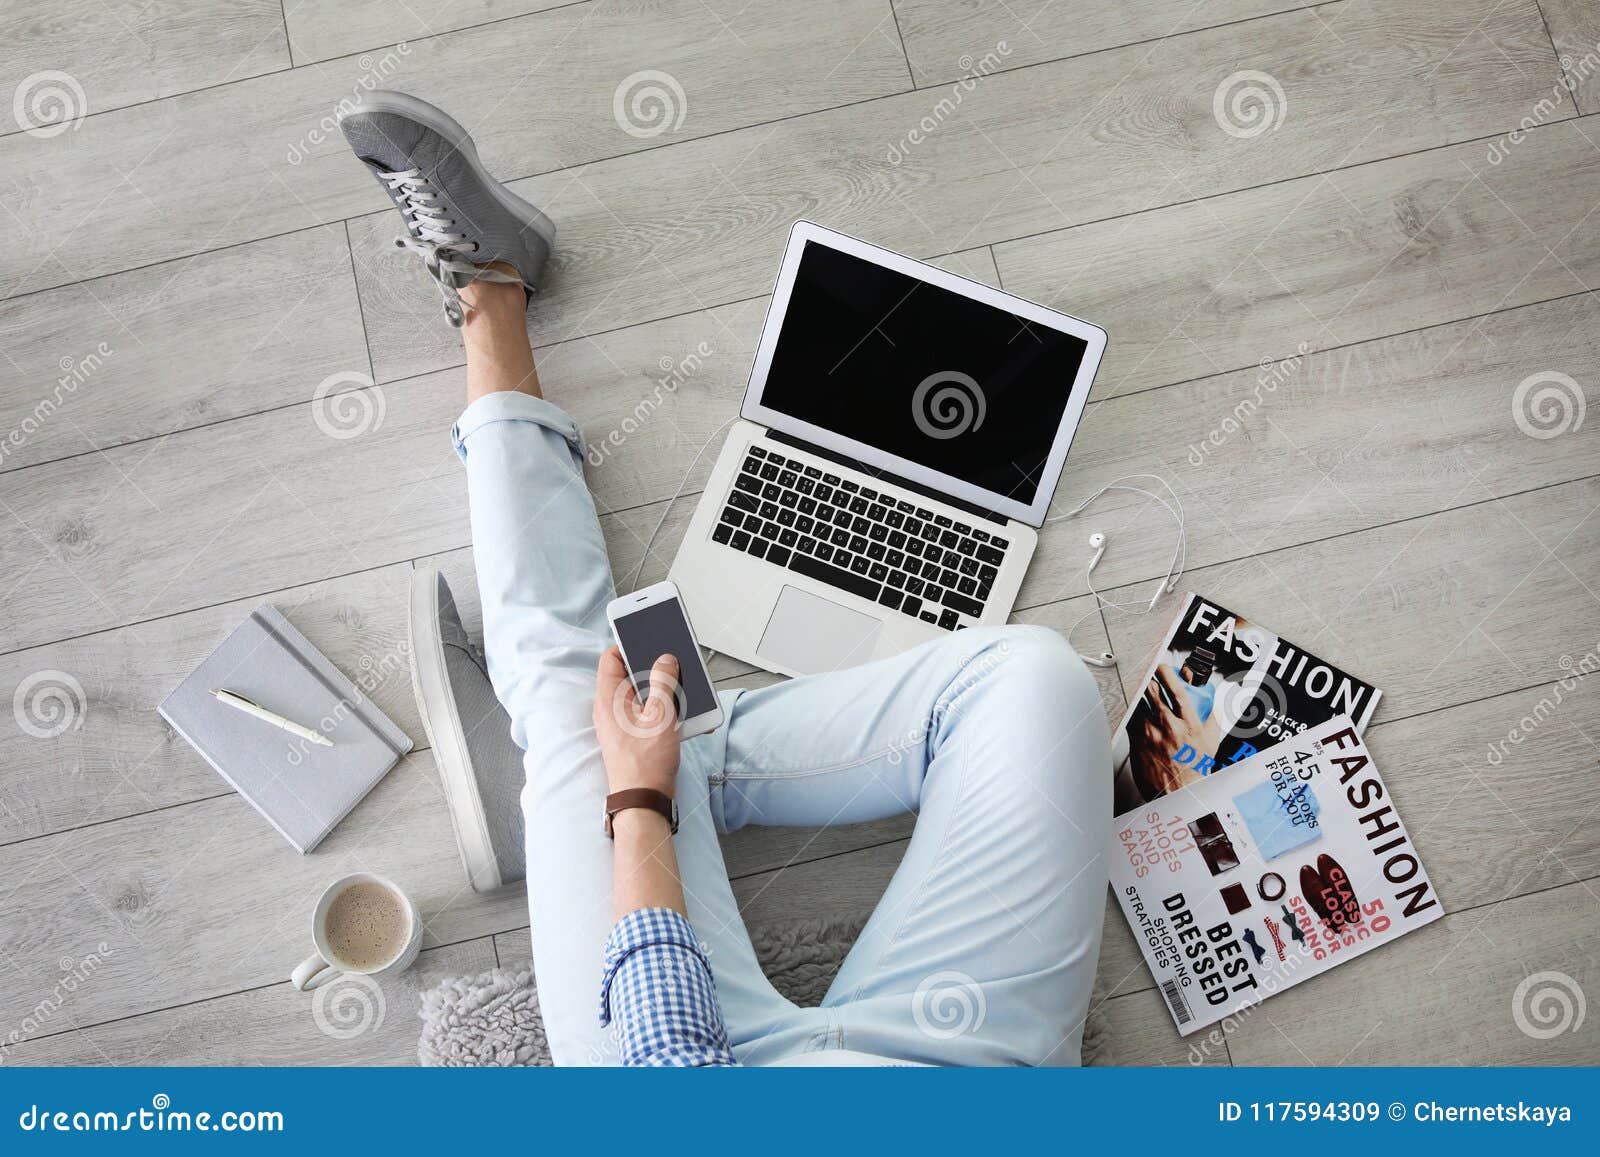 Young Man with Laptop and Mobile Phone Sitting Stock Image - Image of ...